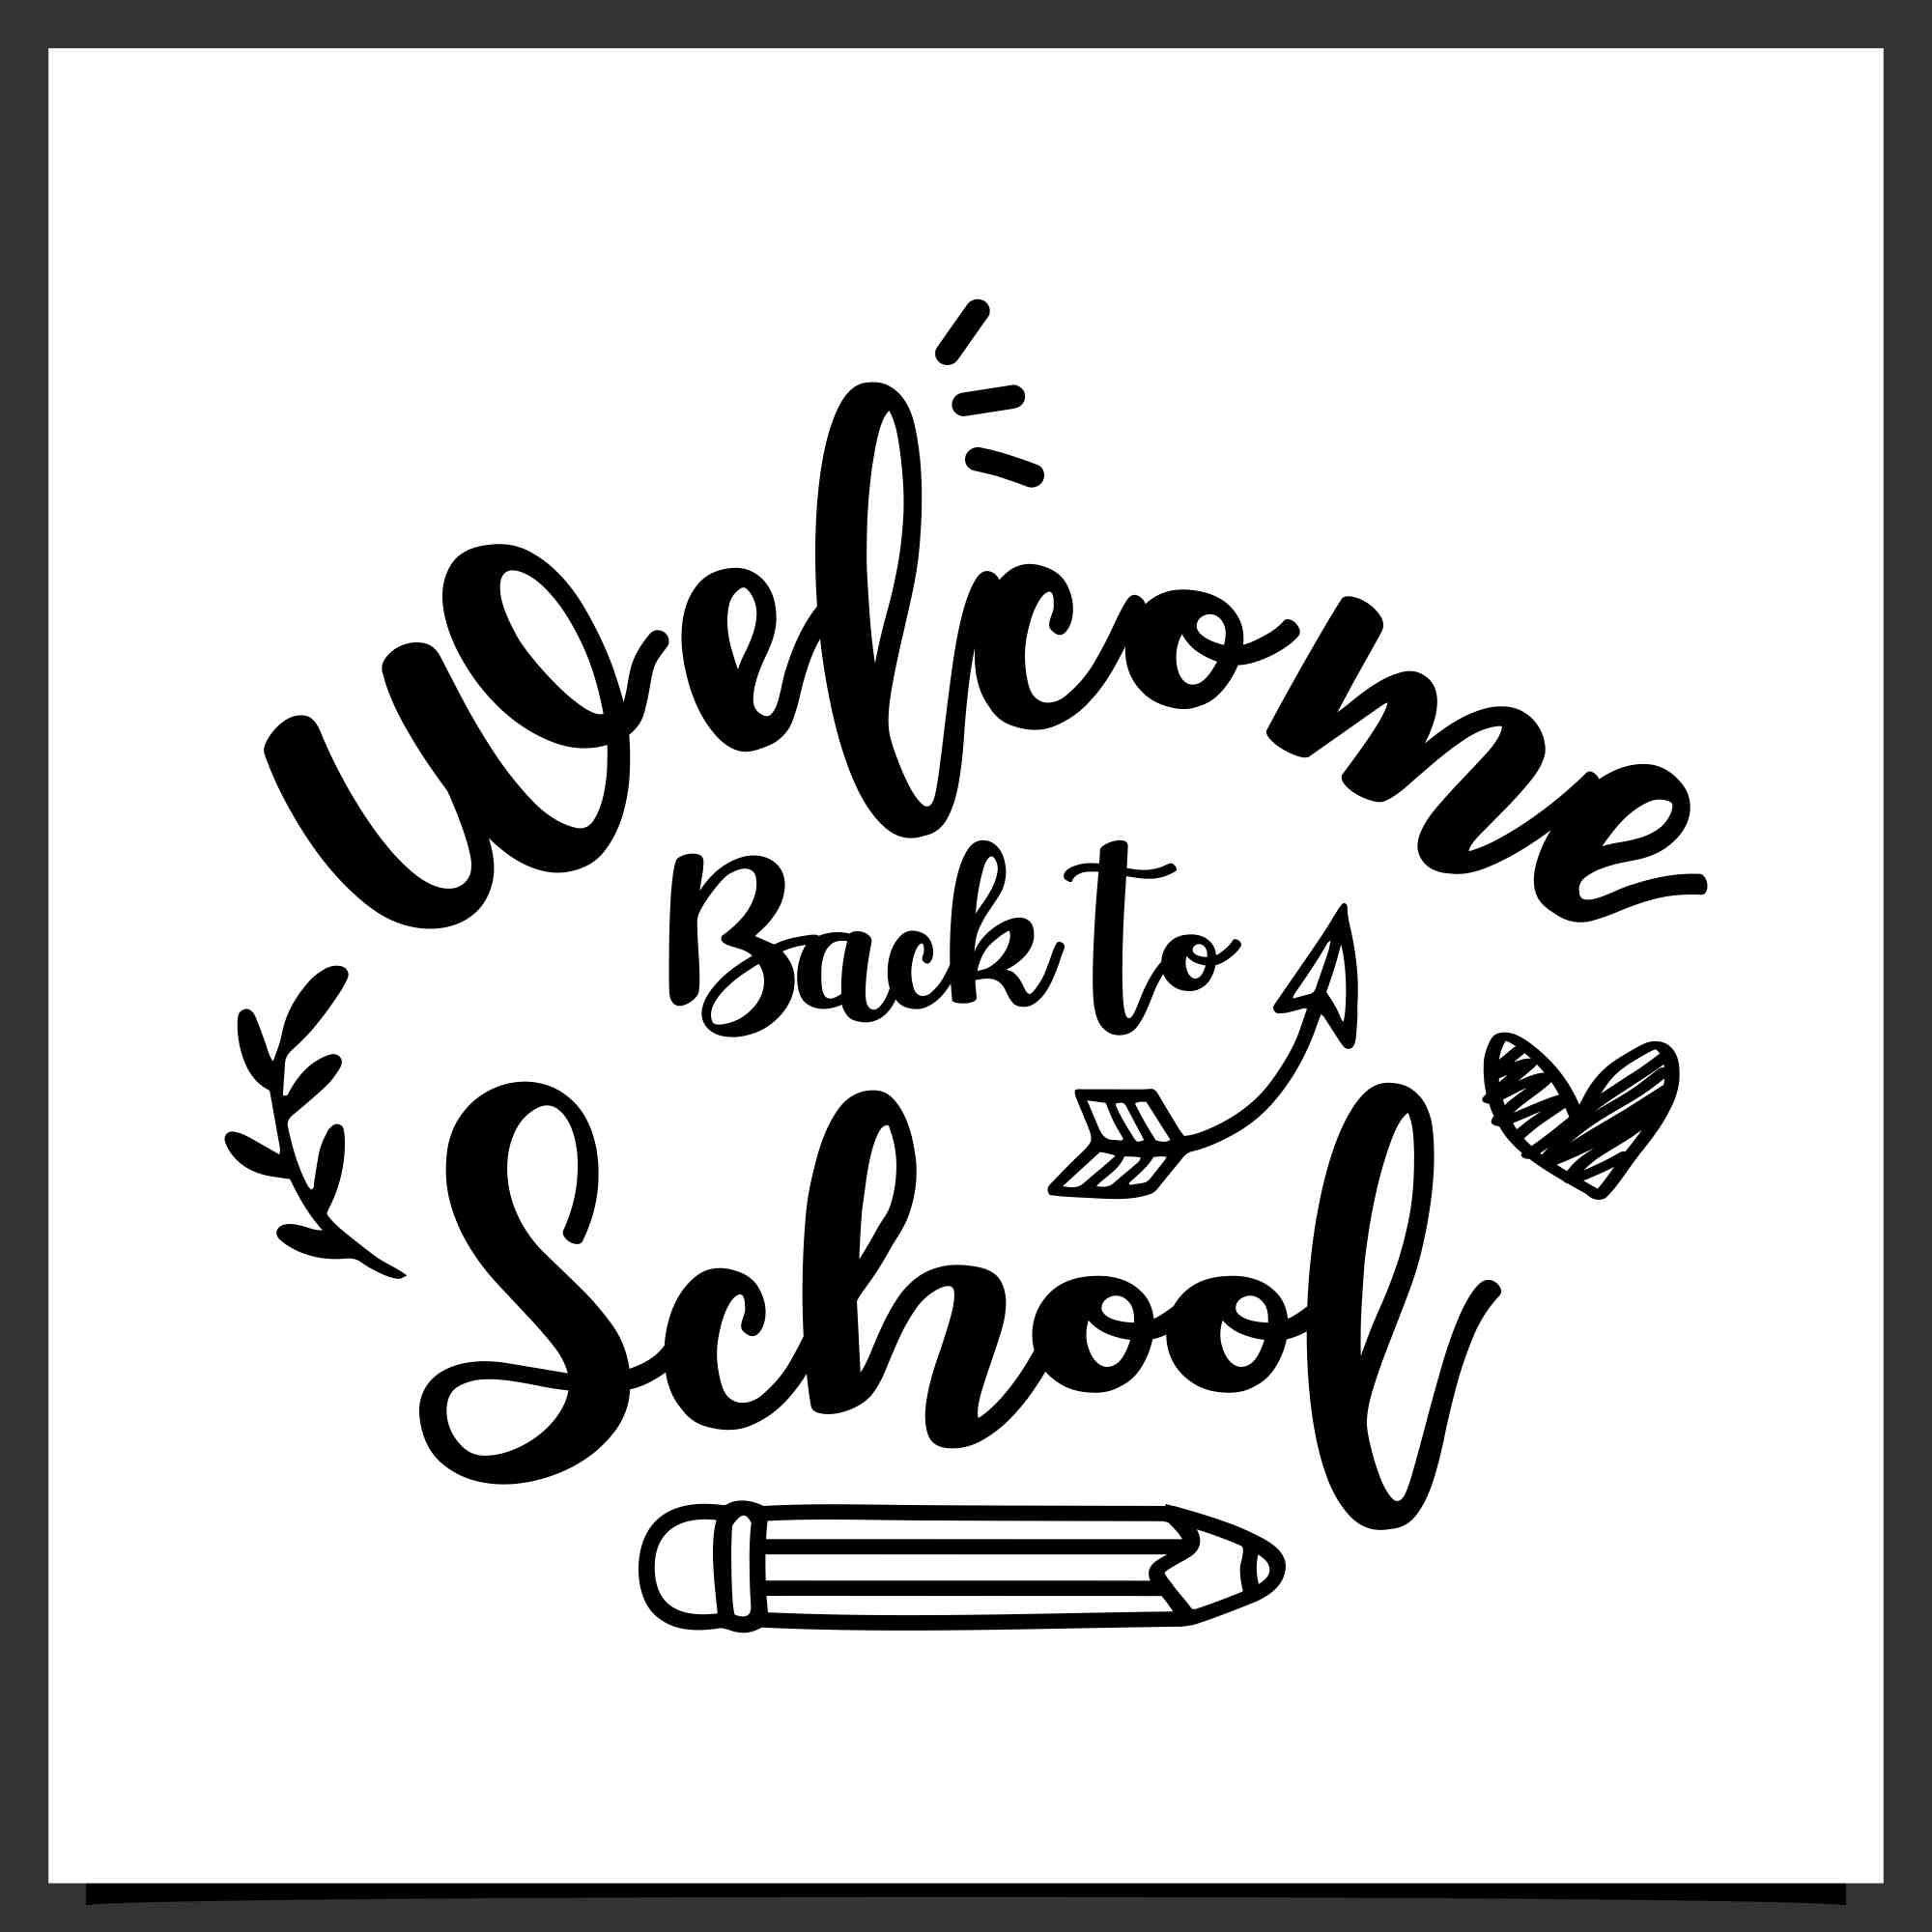 Set Back to school lettering design collection - $6 preview image.